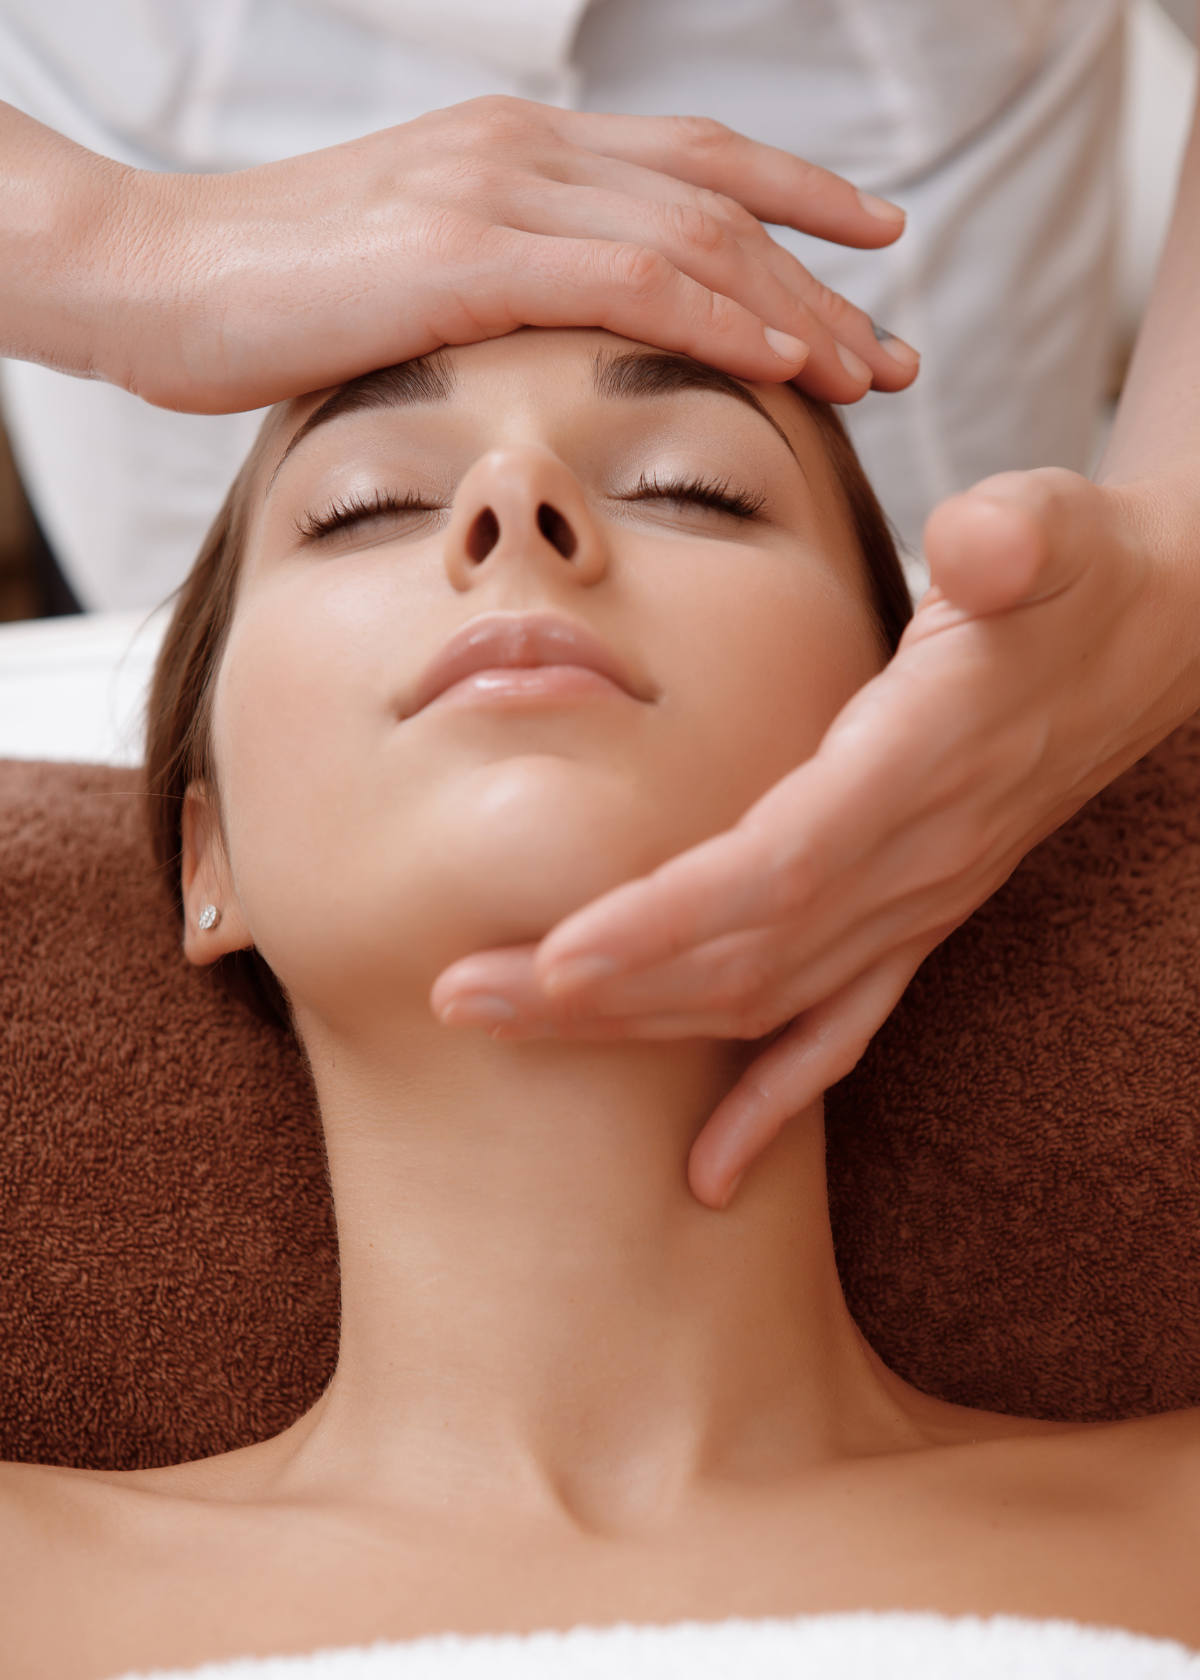 How to Massage Face After Facelift: Beginners' Guide